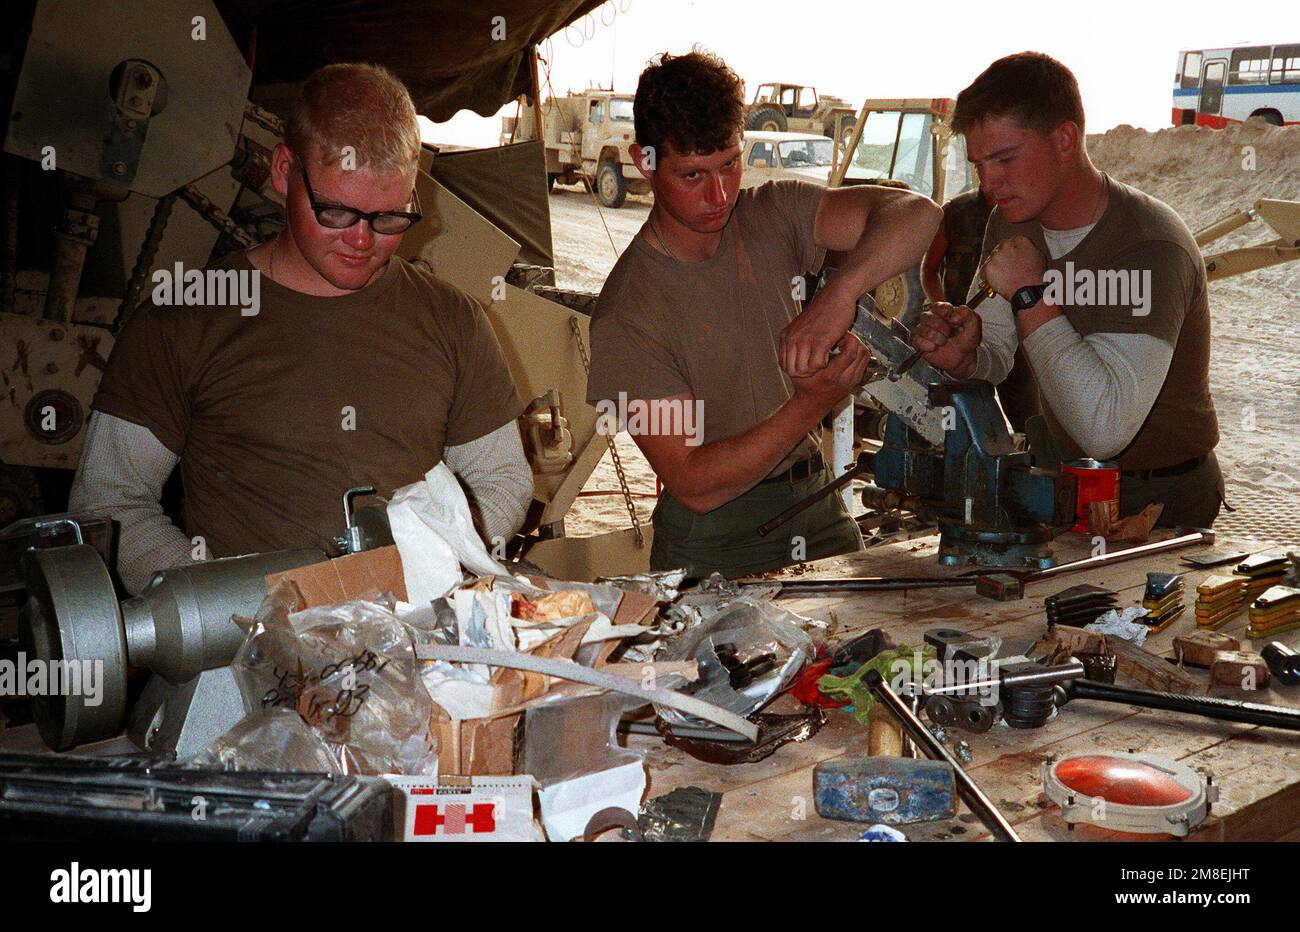 Timothy Lamm, left, a Seabee from Naval Mobile Construction Battalion 5 (NMCB-5), uses a grinding wheel as Seabees John Stevenson, center, and John Redlewski try to free a bolt in a workshop at a camp under construction in northern Saudi Arabia during Operation Desert Storm. Subject Operation/Series: DESERT STORM Country: Saudi Arabia (SAU) Stock Photo